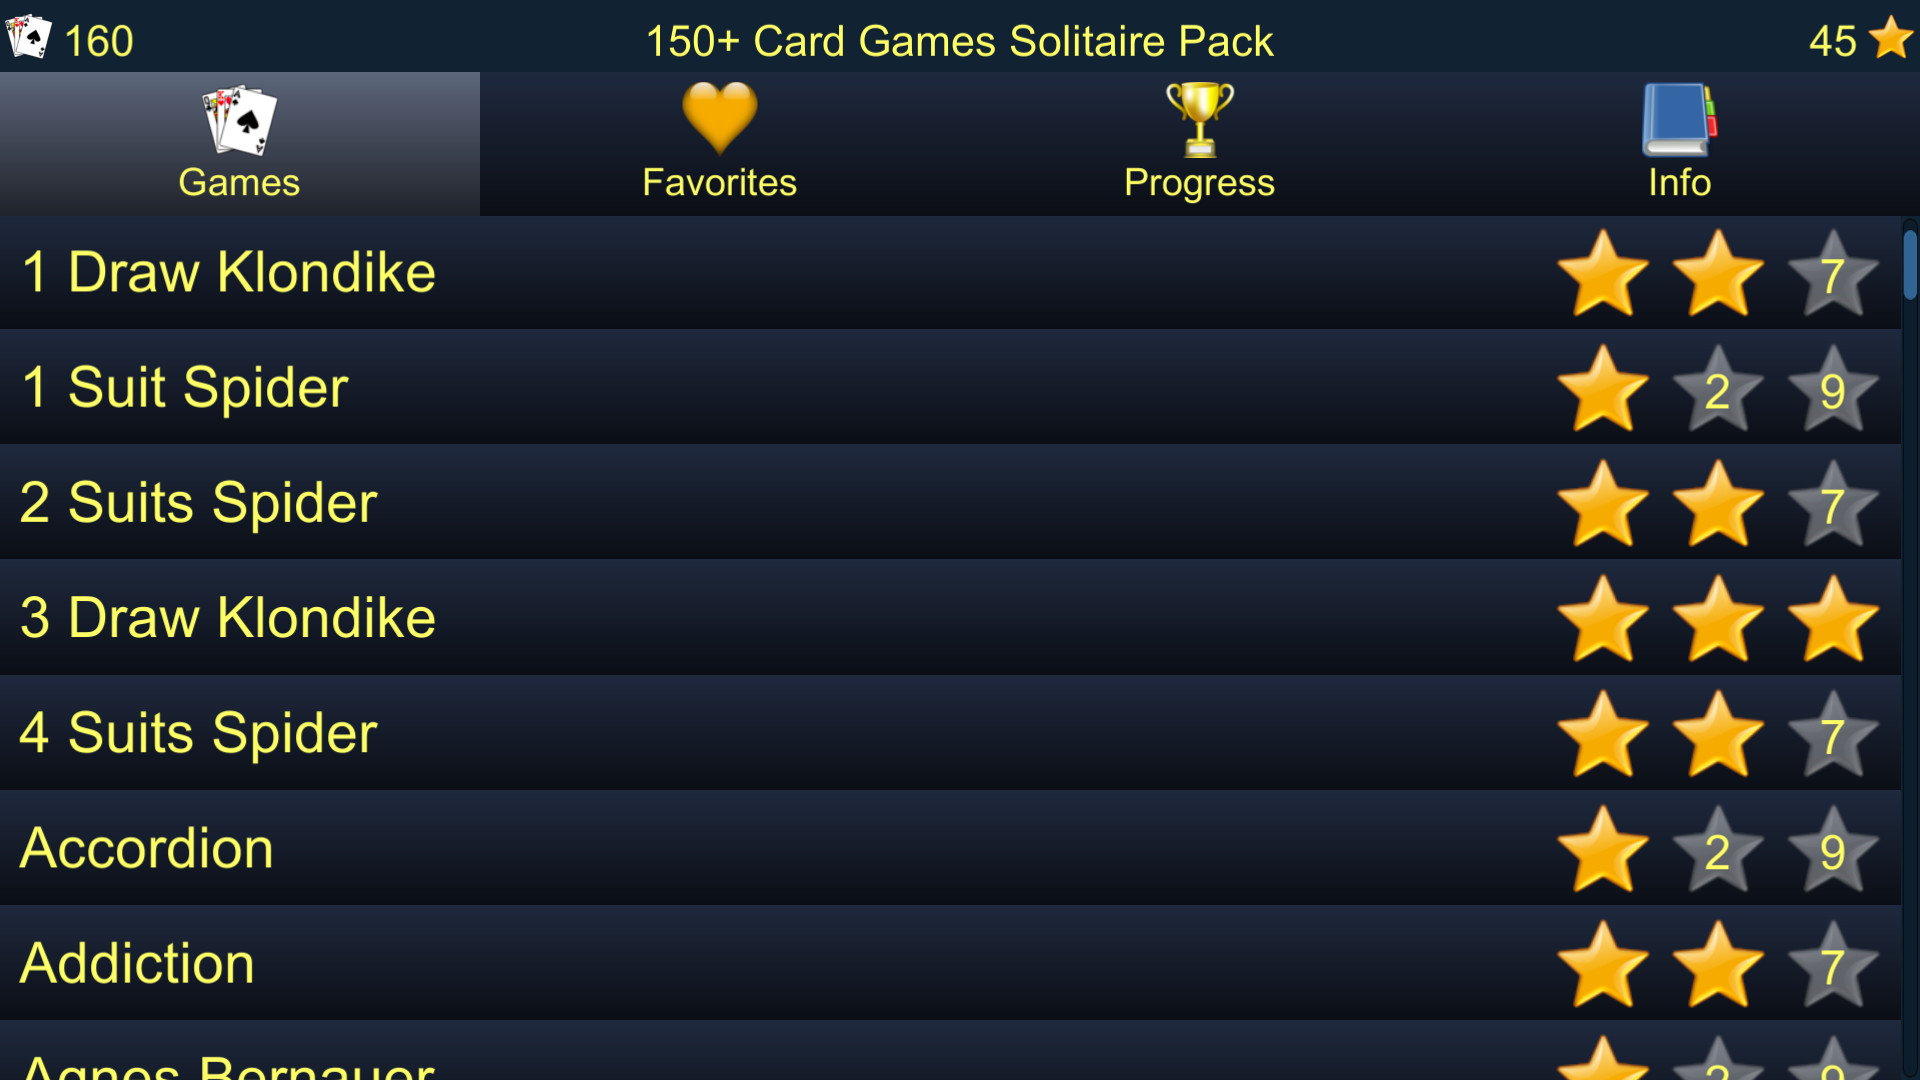 150+ Card Games Solitaire Pack Steam CD Key, 0.63$